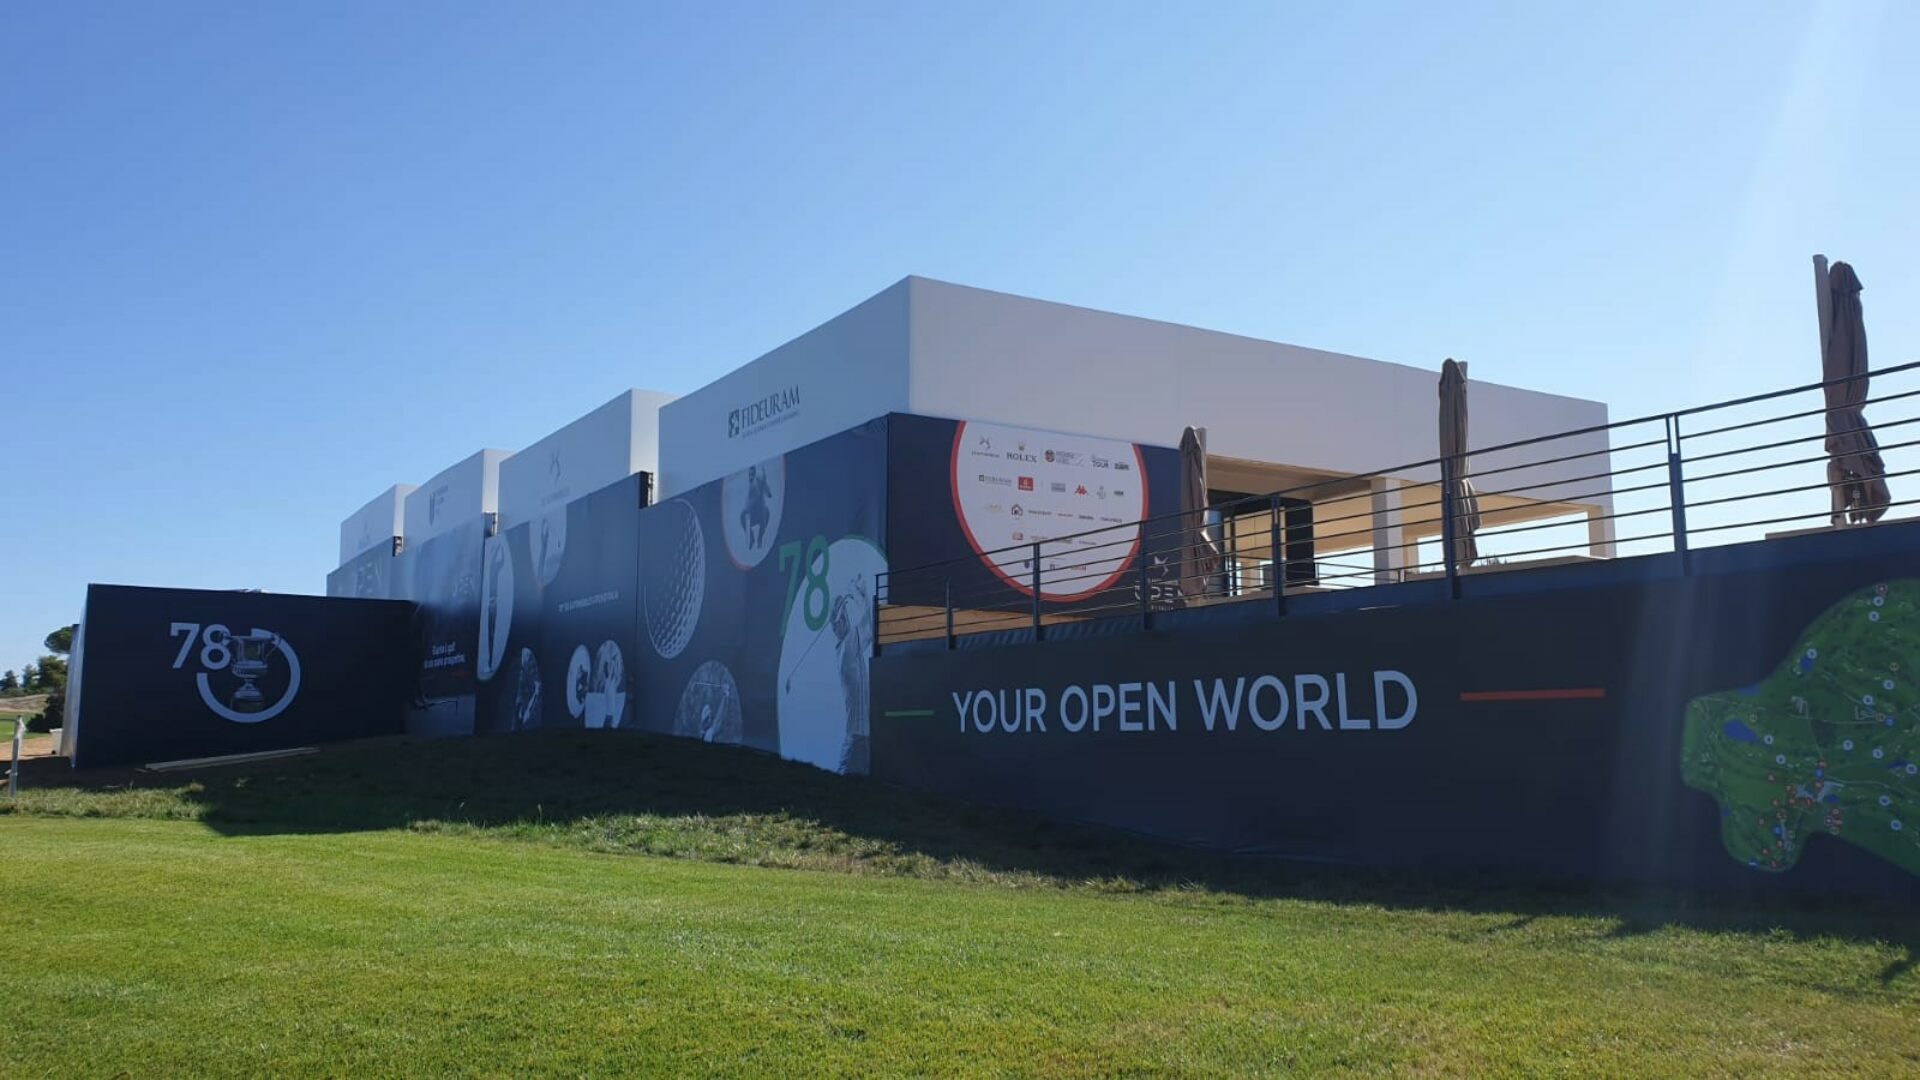 Tensotend has set up the 78th edition of the Italian Golf Open in Rome